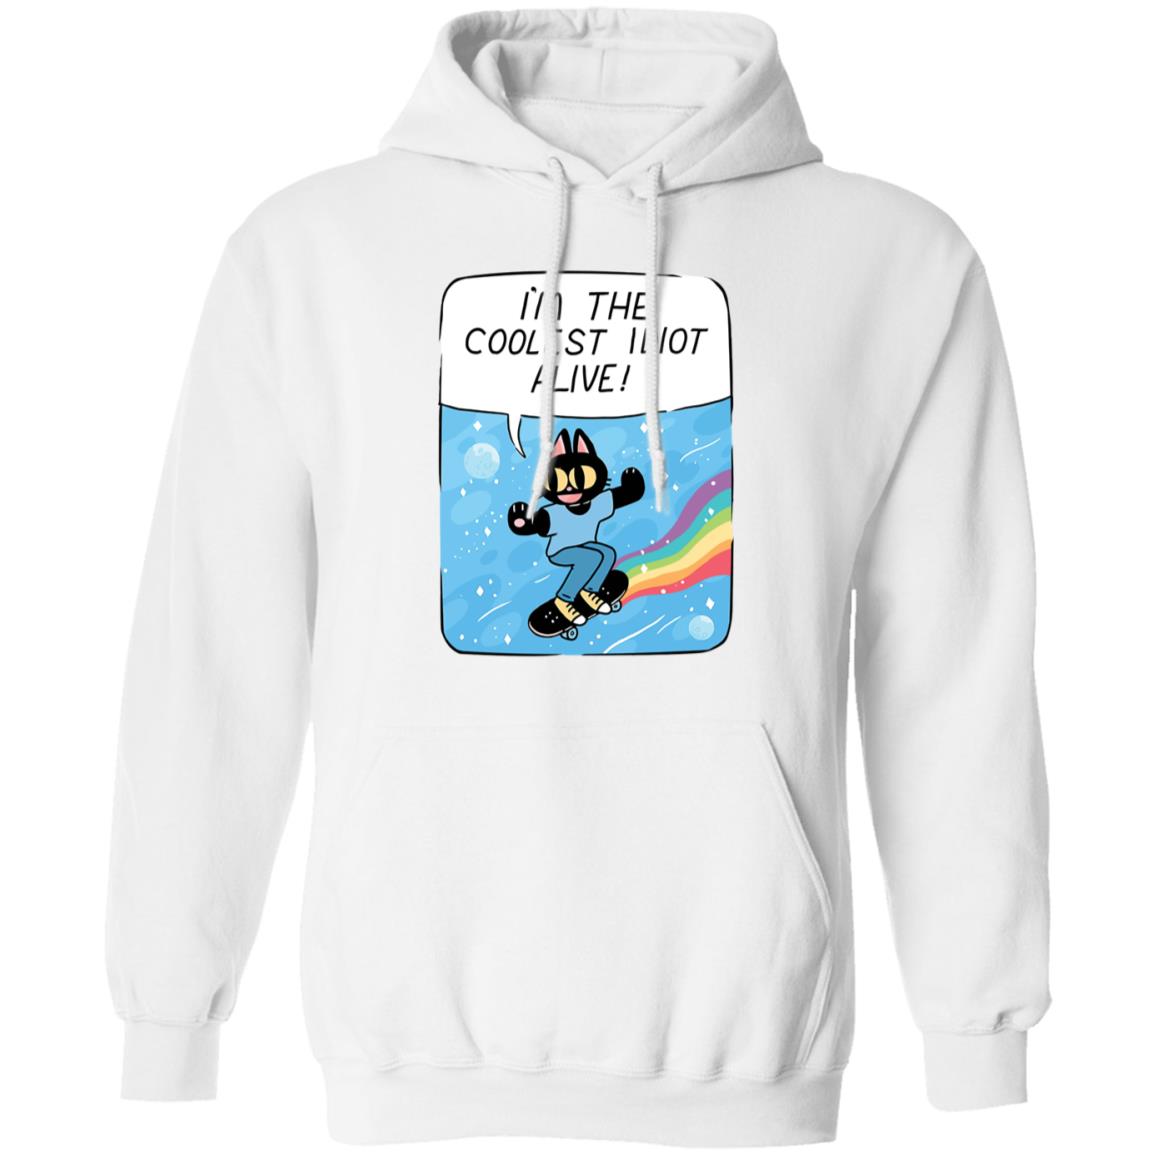 Mollyjohnt I’m The Coolest Idiot Alive Shirt 1